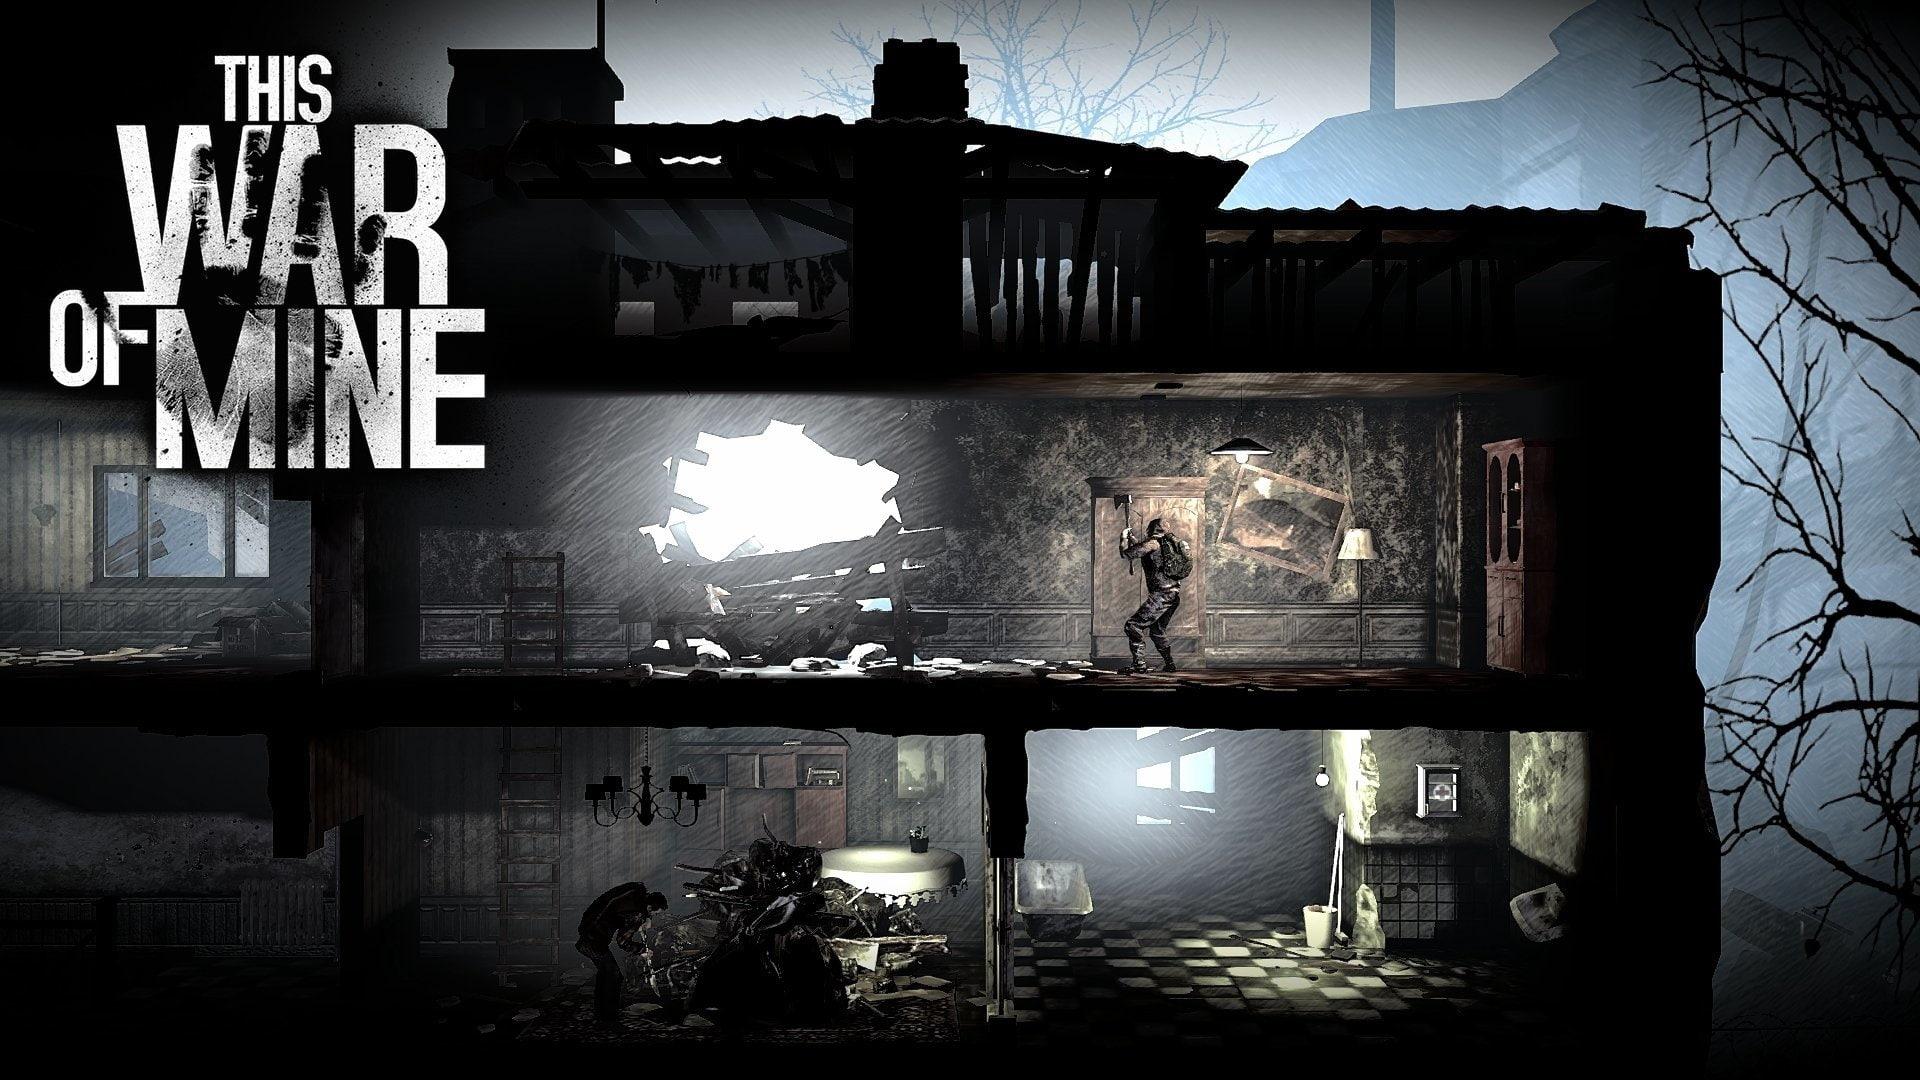 HD wallpaper: Video Game, This War of Mine